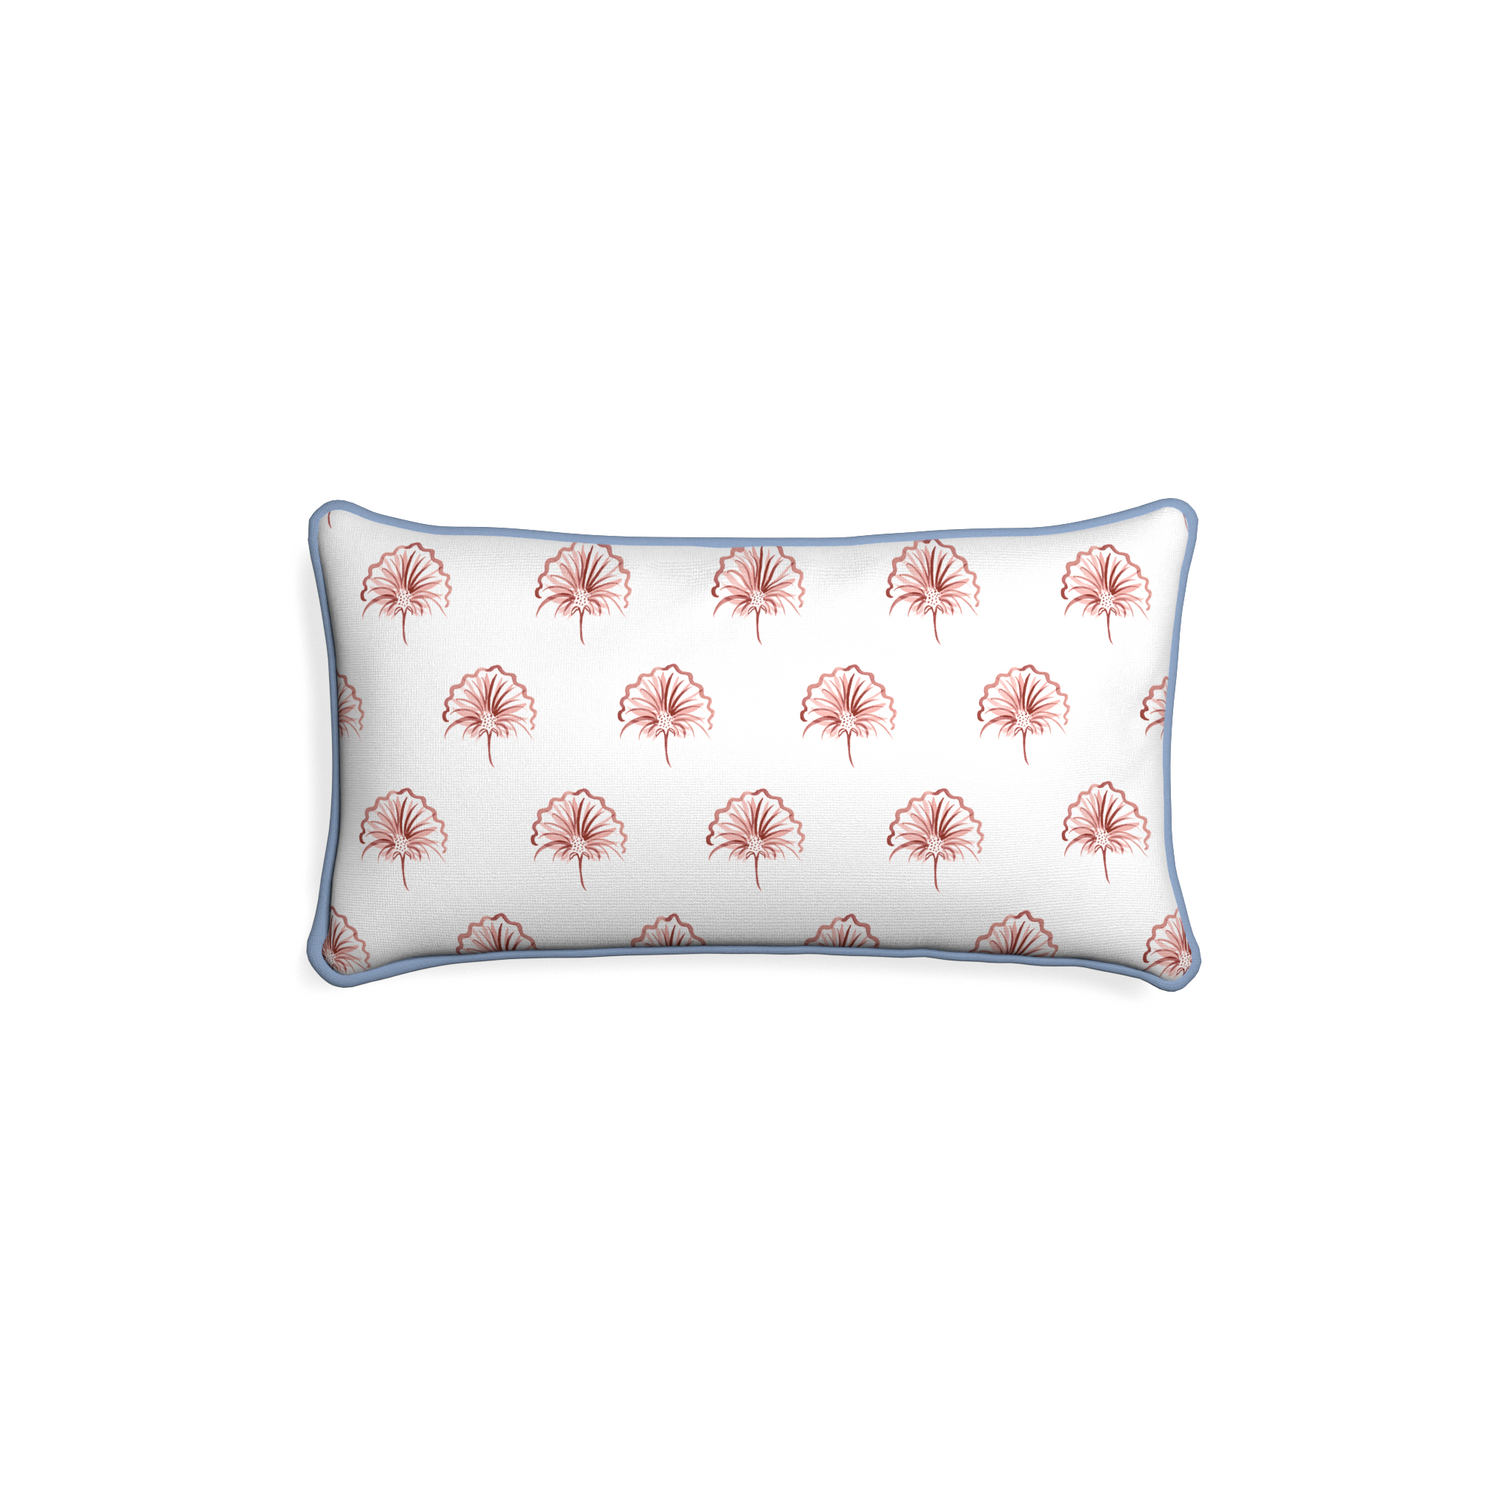 Petite-lumbar penelope rose custom floral pinkpillow with sky piping on white background